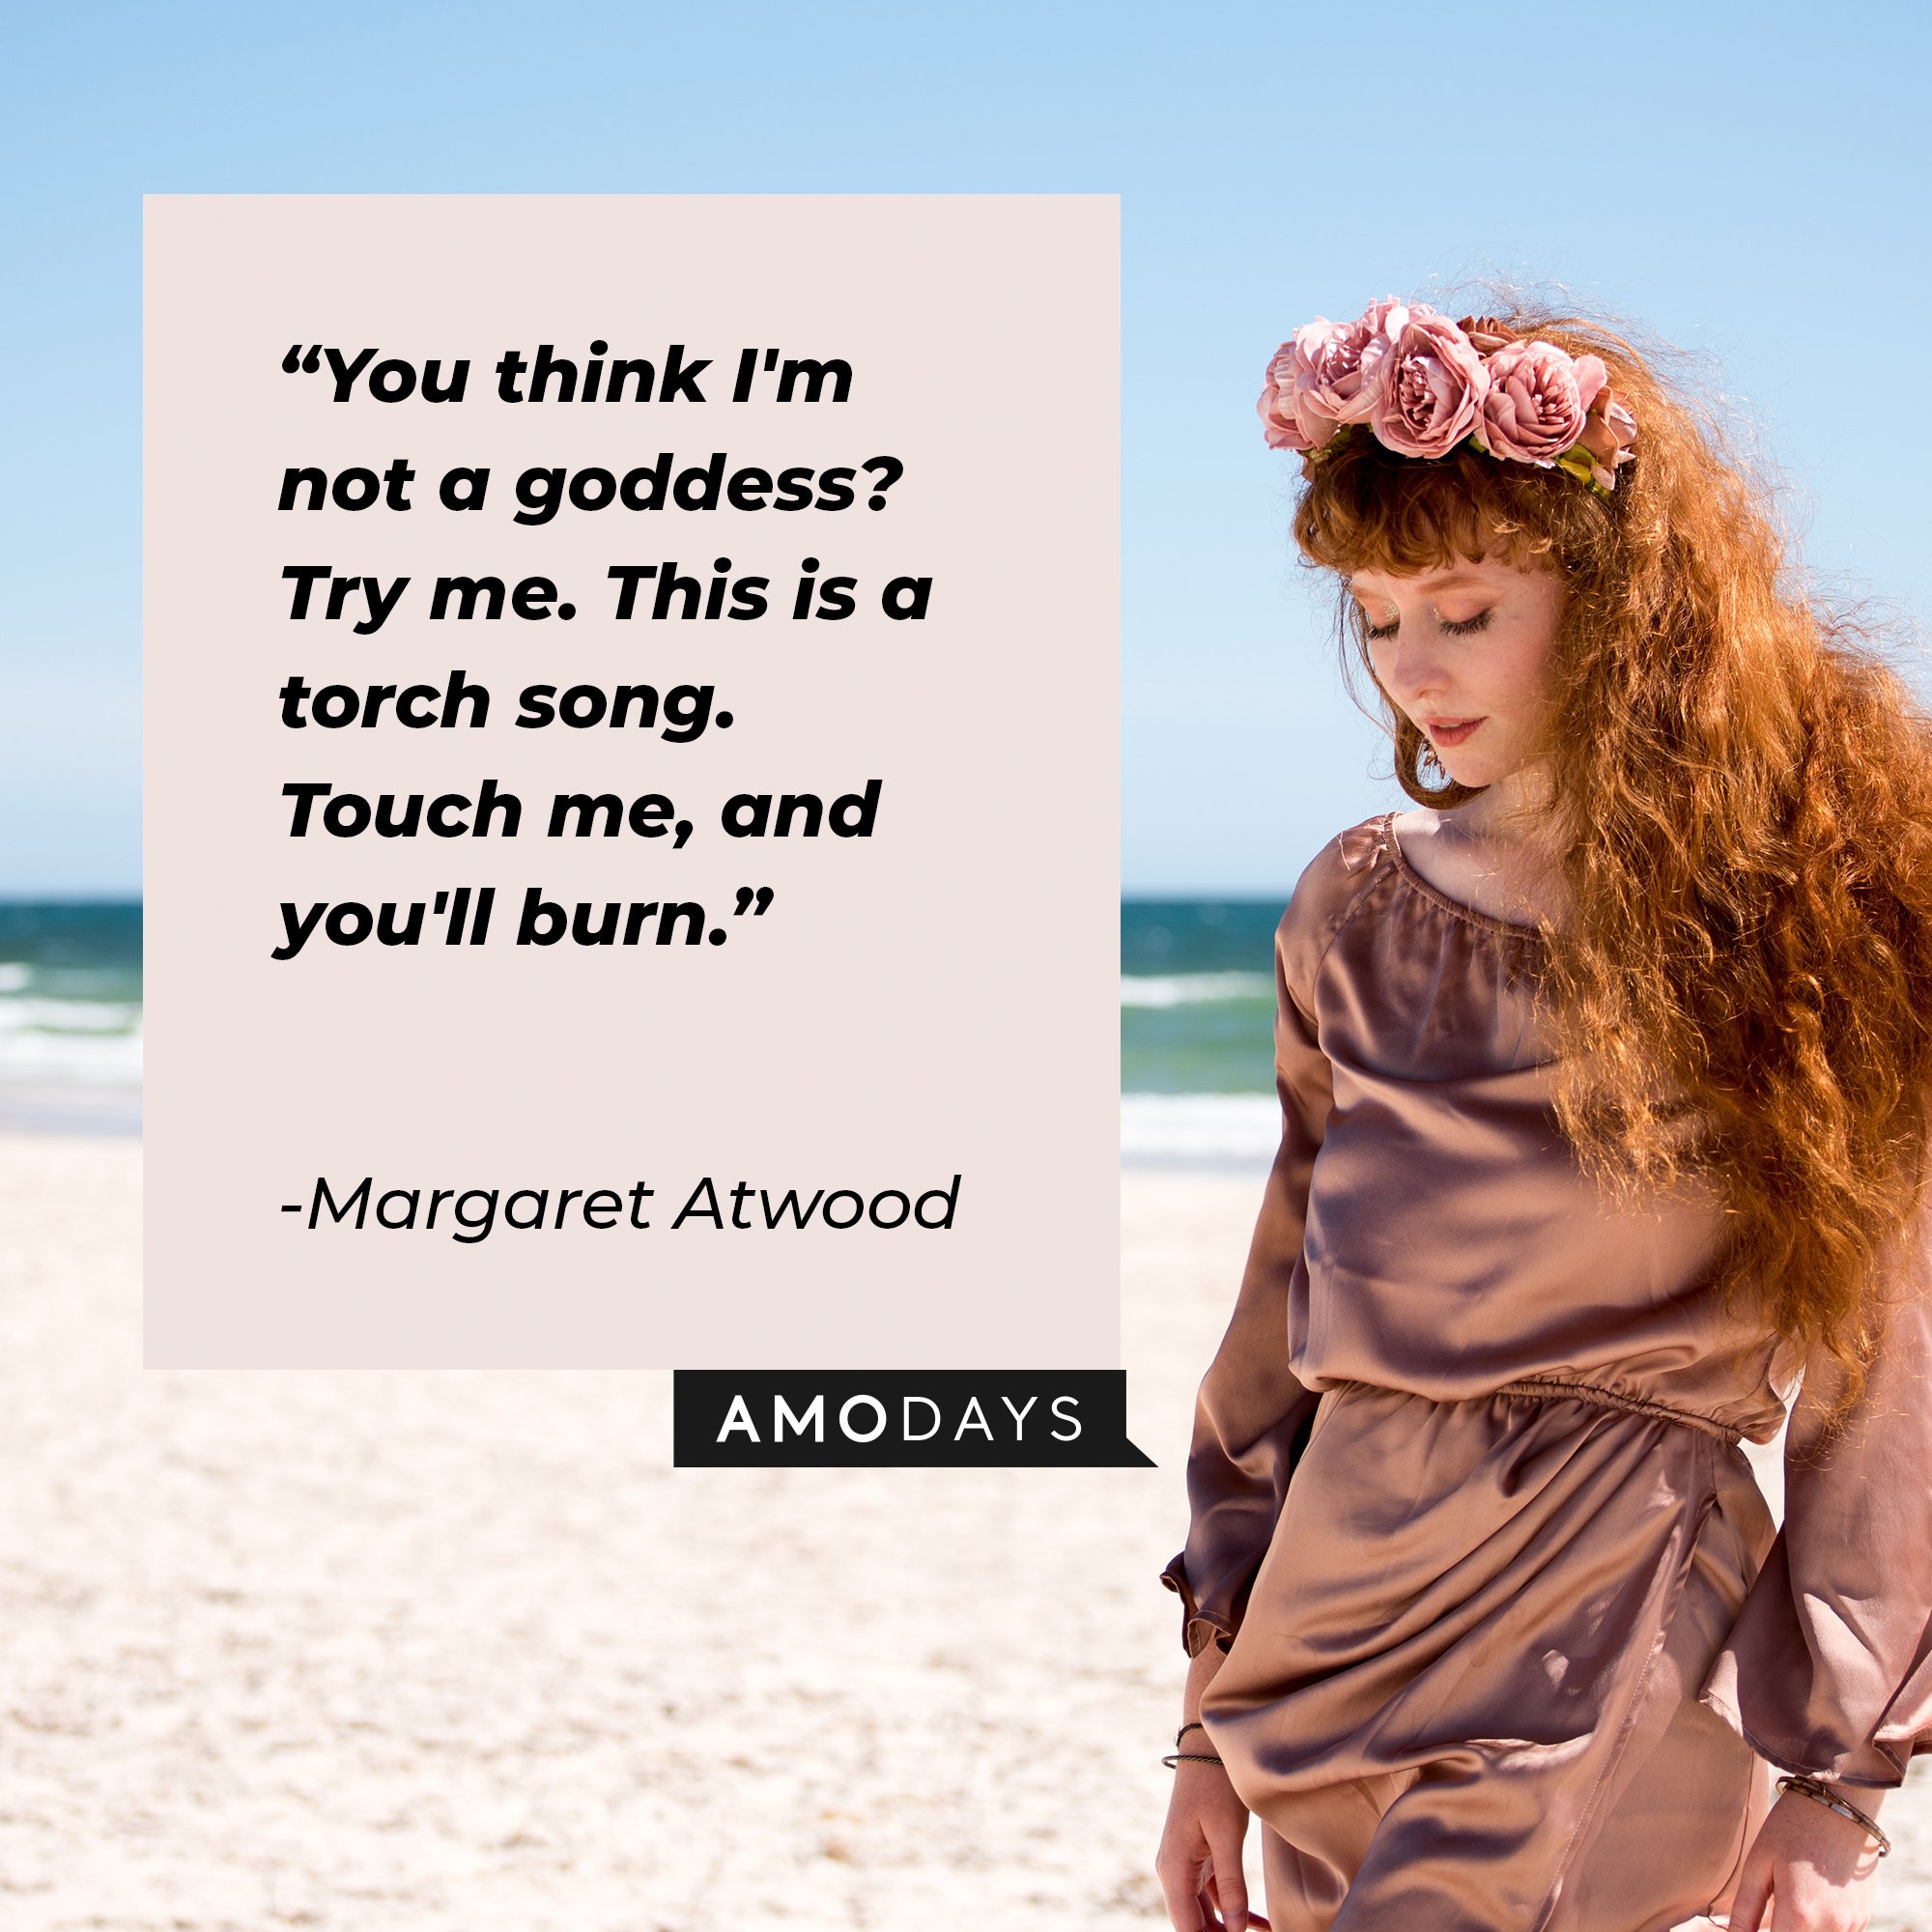  Margaret Atwood’s quote: "You think I'm not a goddess? Try me. This is a torch song. Touch me, and you'll burn." | Image: AmoDays 